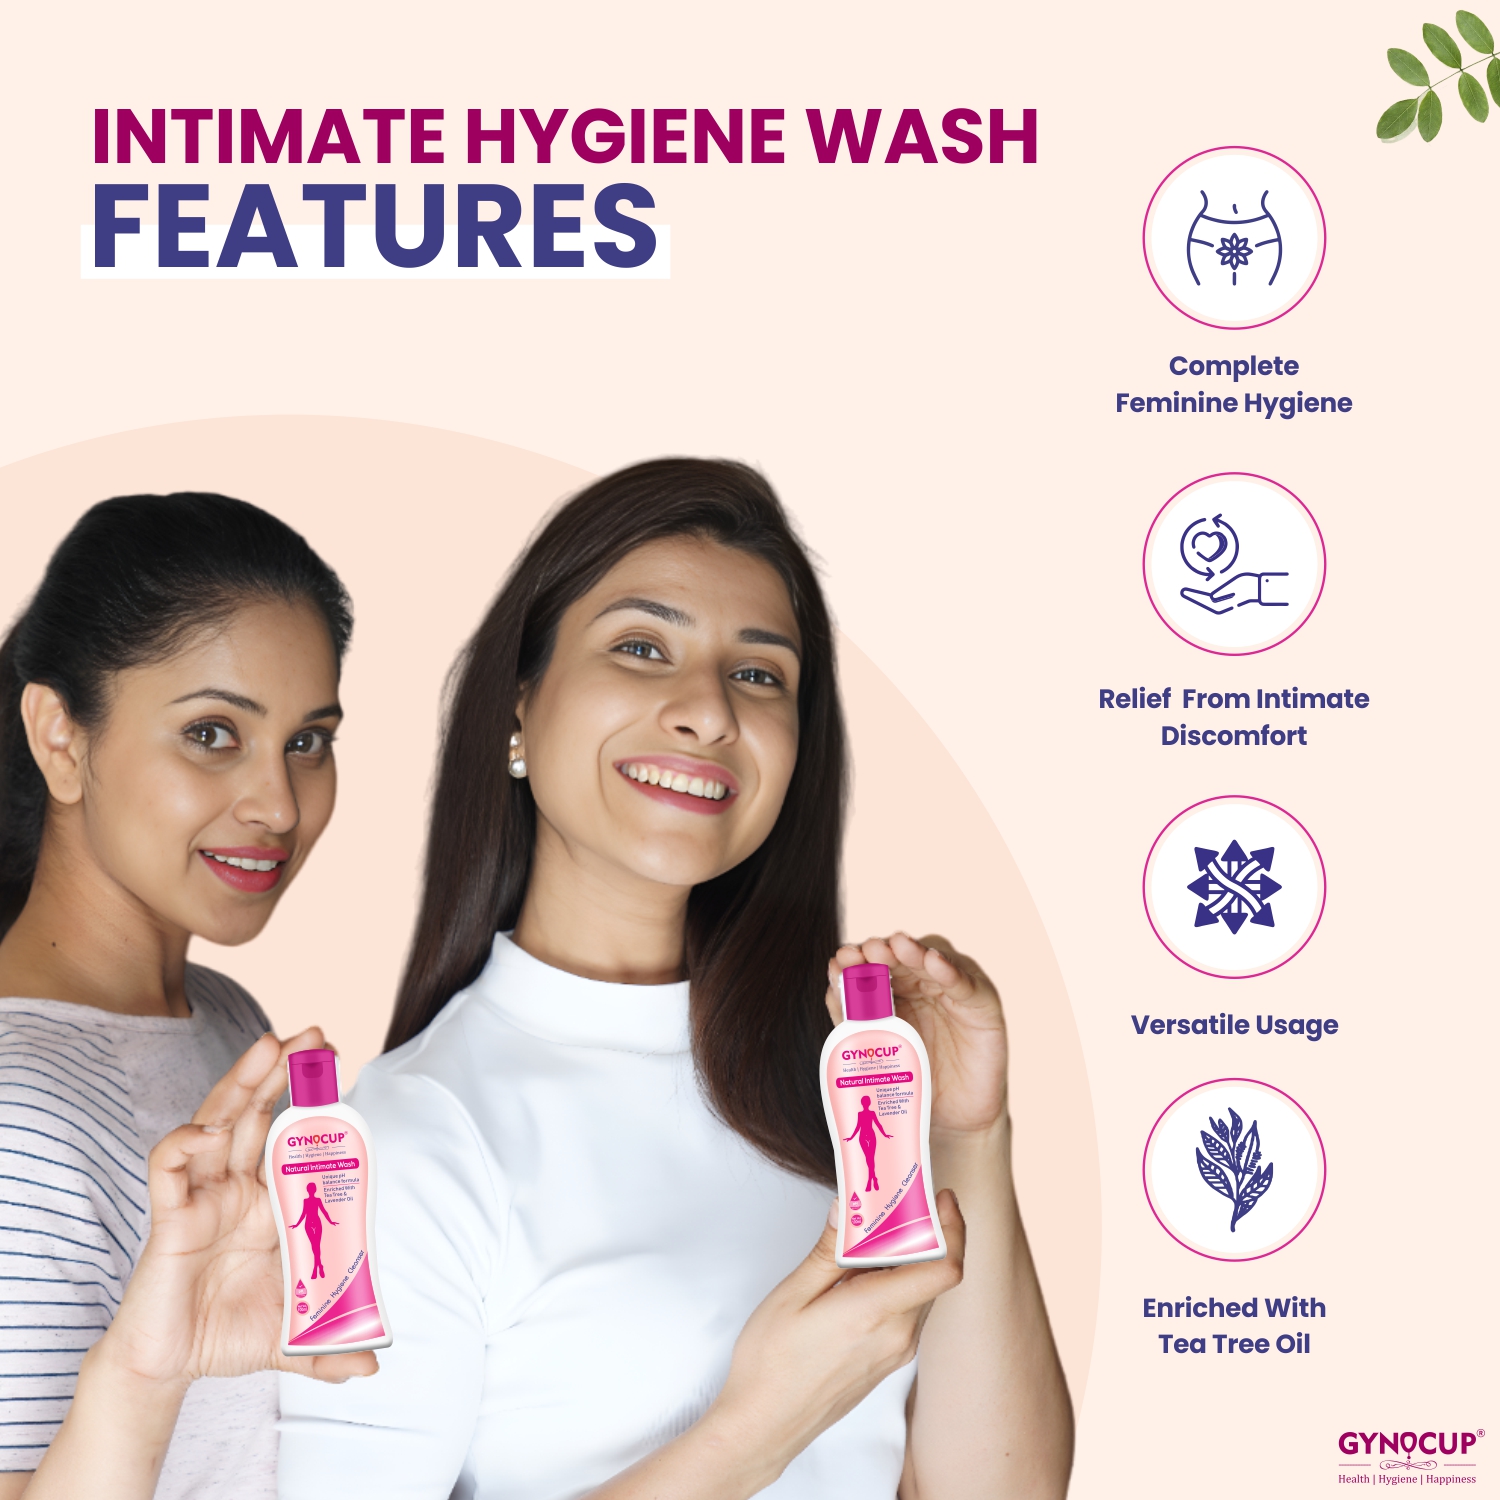 GynoCup Intimate Wash For Women, Enriched With Tea Tree Oil & Aloe Vera Extract, PH Balanced, 100ml